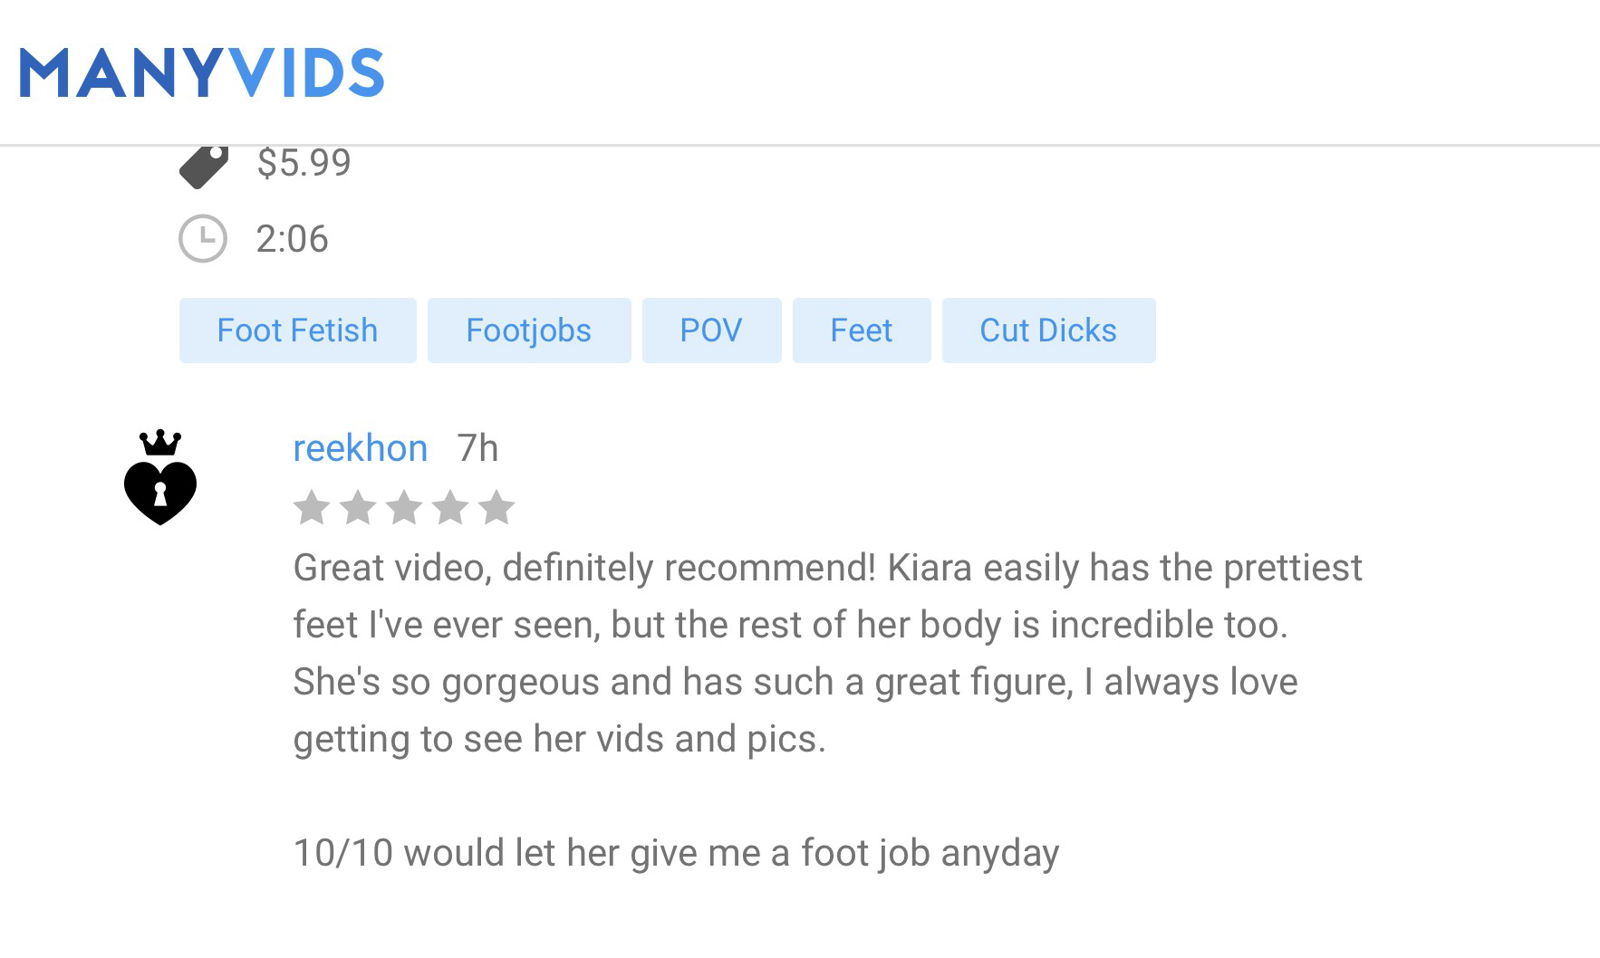 Photo by Kiara Skye with the username @KiaraSkye, who is a star user,  April 3, 2020 at 2:00 PM. The post is about the topic Foot Fetish and the text says '⭐️New 5 STAR review on this footjob pov vid!🦶

💸Get your copy for just $5.99 - https://www.manyvids.com/Video/1529599/french-pedicure-footjob-pov/ 

#footjob #pov #feet #footfetish #pedicure #cheap #amateur #foot #fj #soles #toes #brunette #thick'